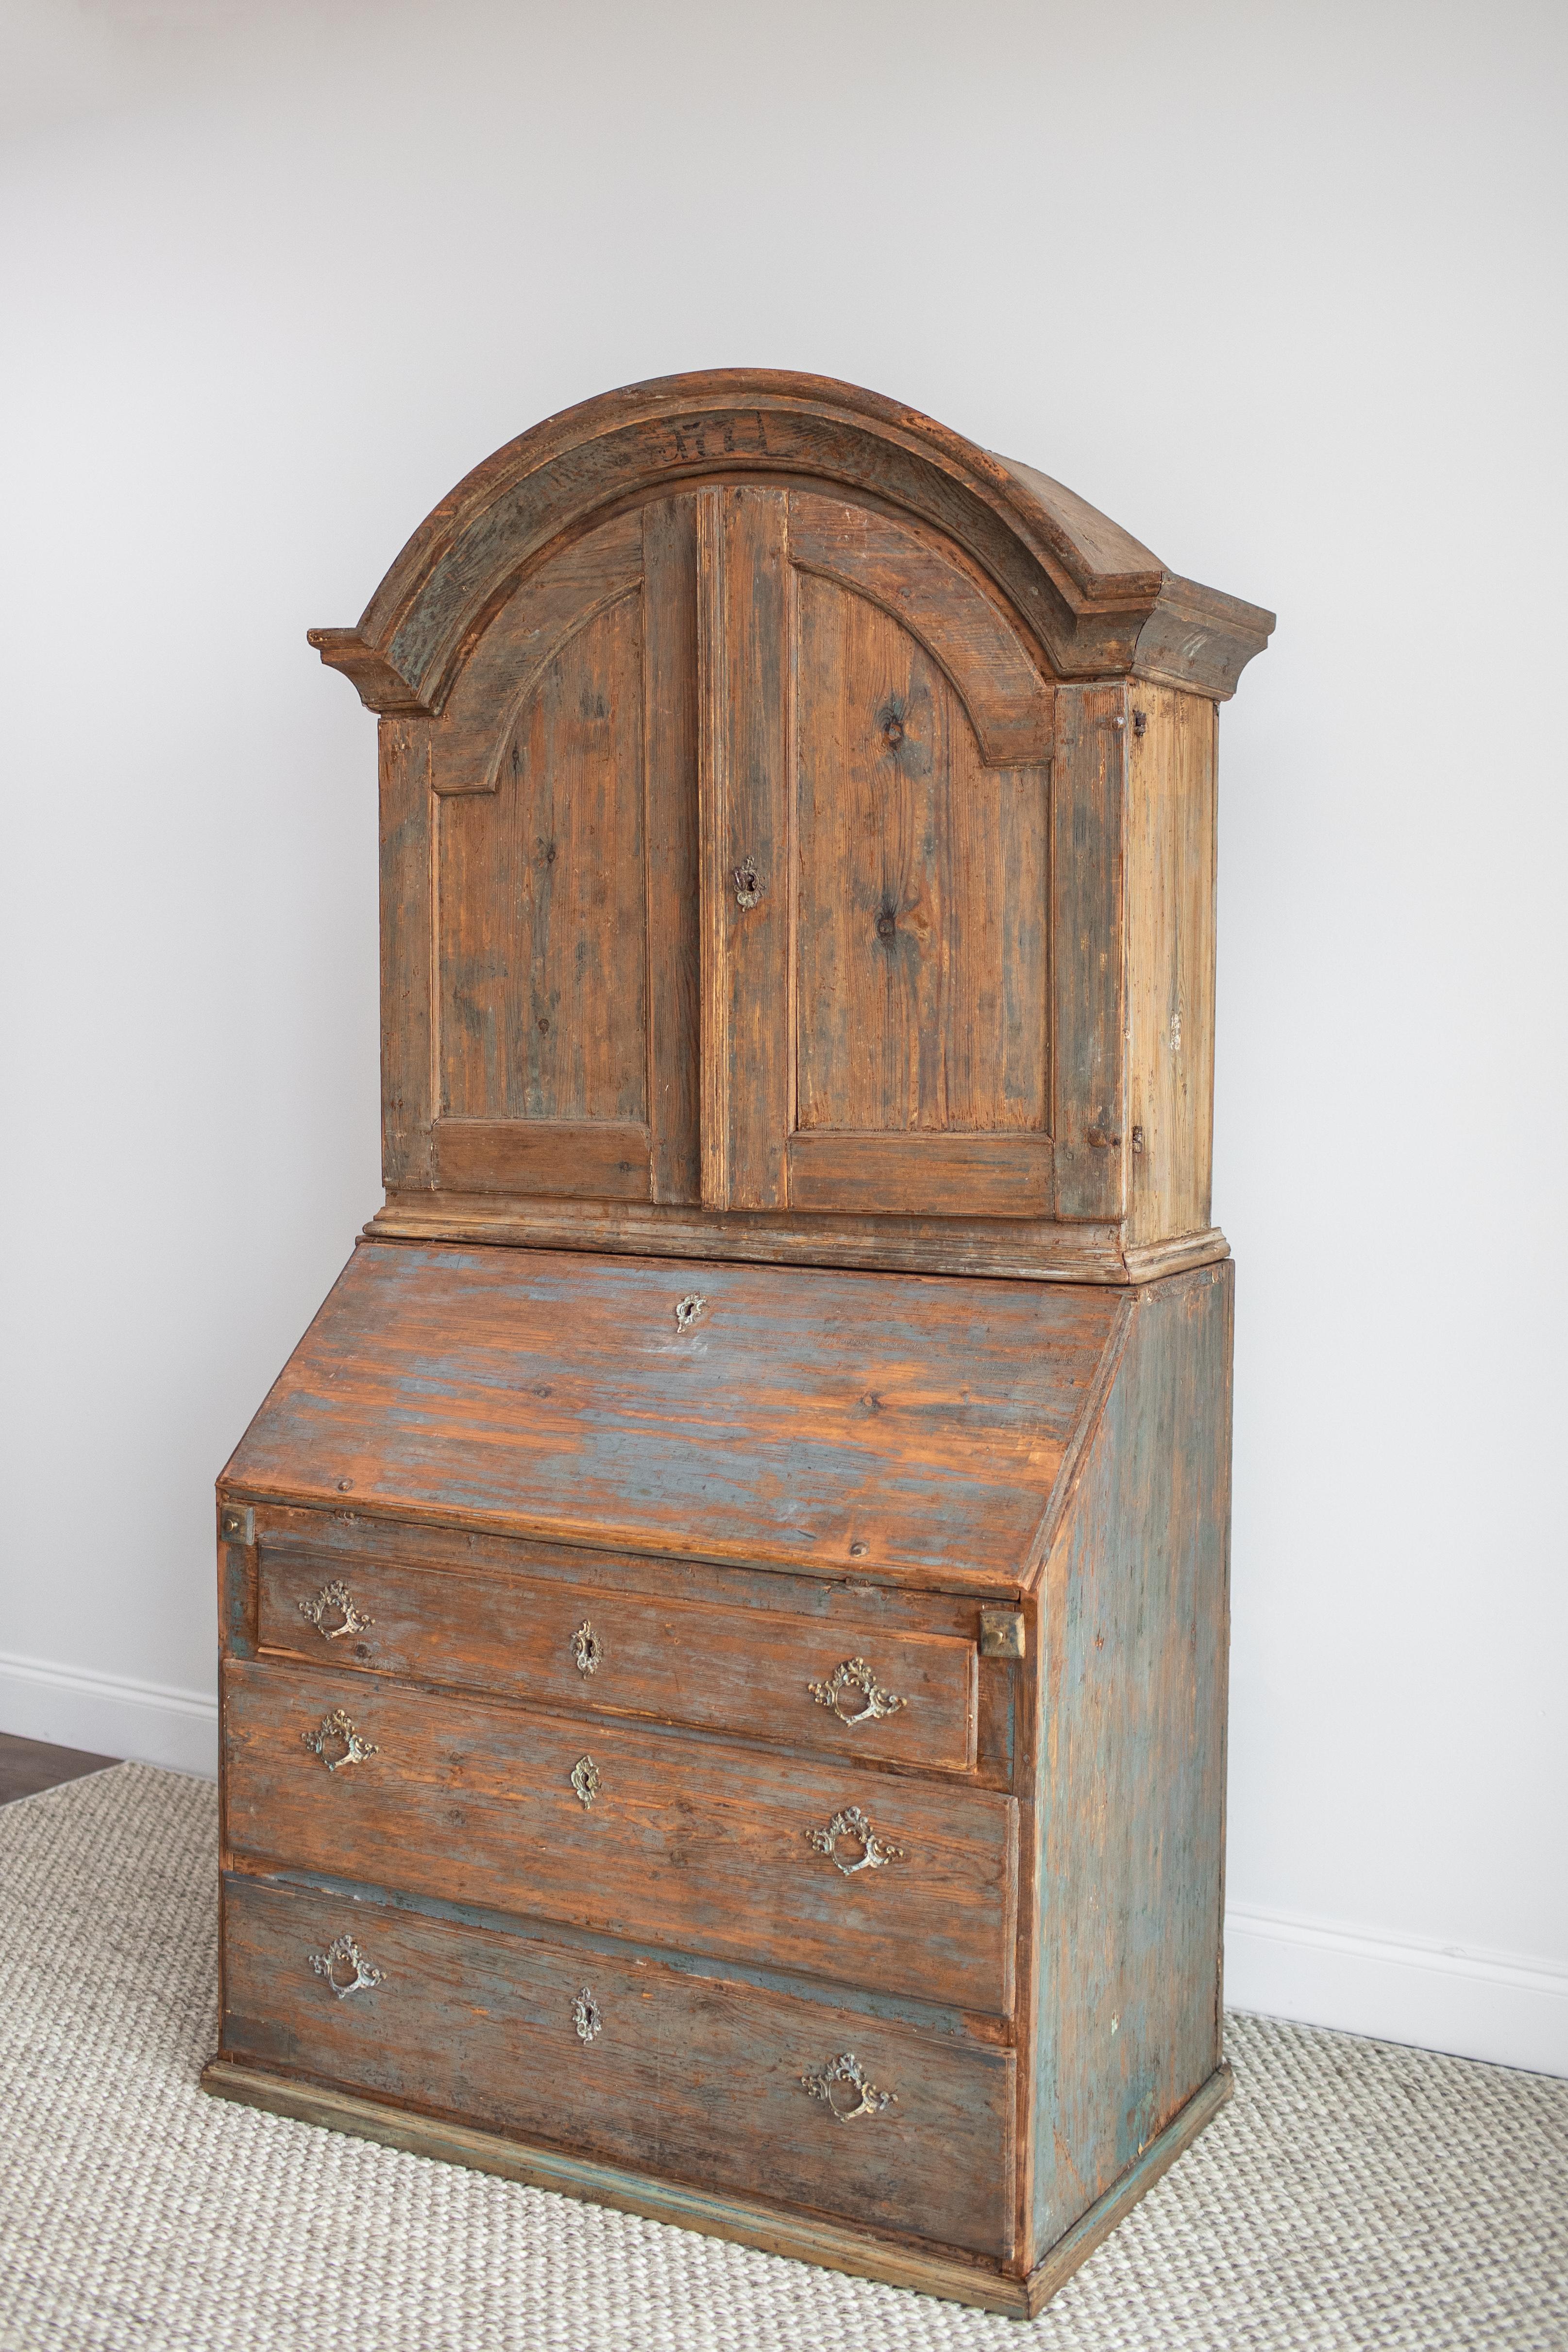 This beautiful 18th century Swedish secretary has the original finish and hardware. The finish is a grey/blue color. The condition is fair. It has two interior shelves and three drawers.